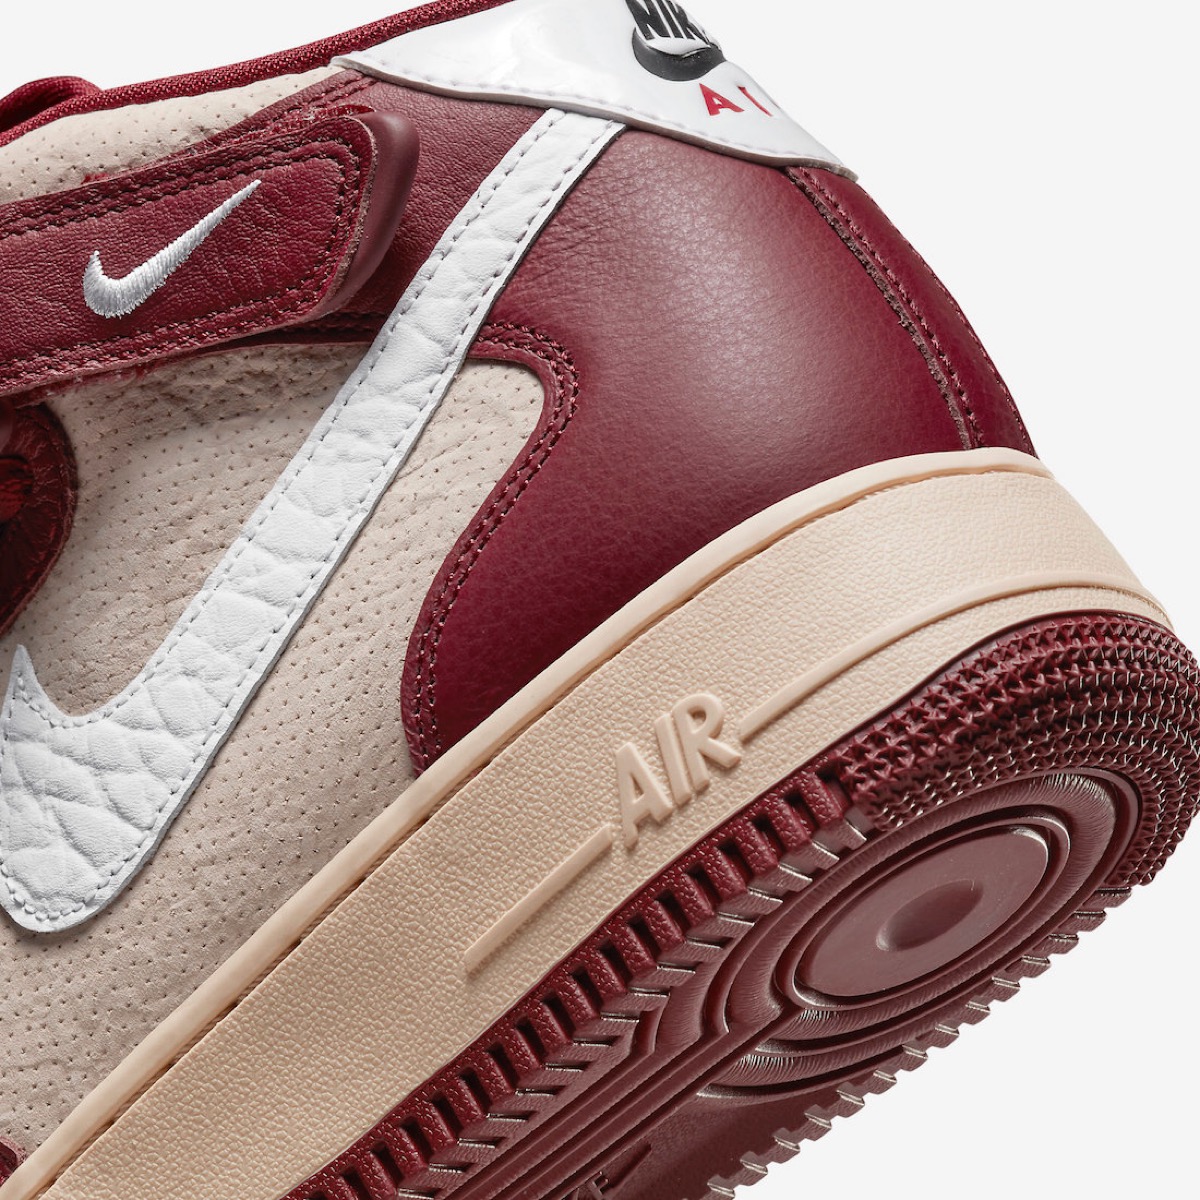 Nike Air Force 1 Mid “London”が5月20日に発売予定 | UP TO DATE